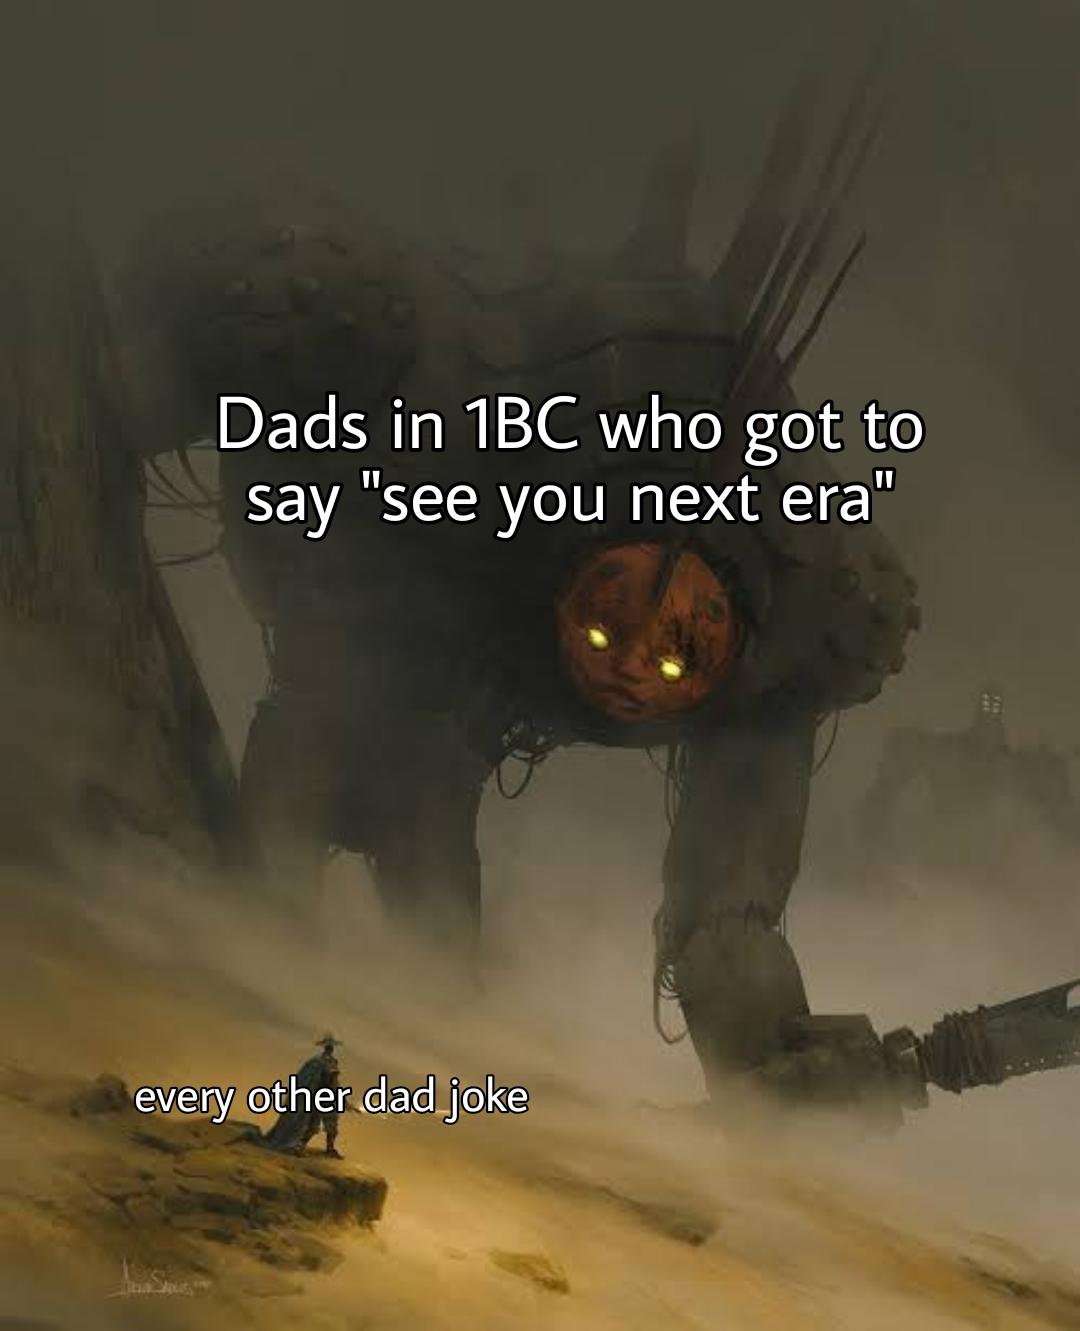 funny memes - pickles in burger meme - Dads in 1BC who got to say "see you next era" every other dad joke